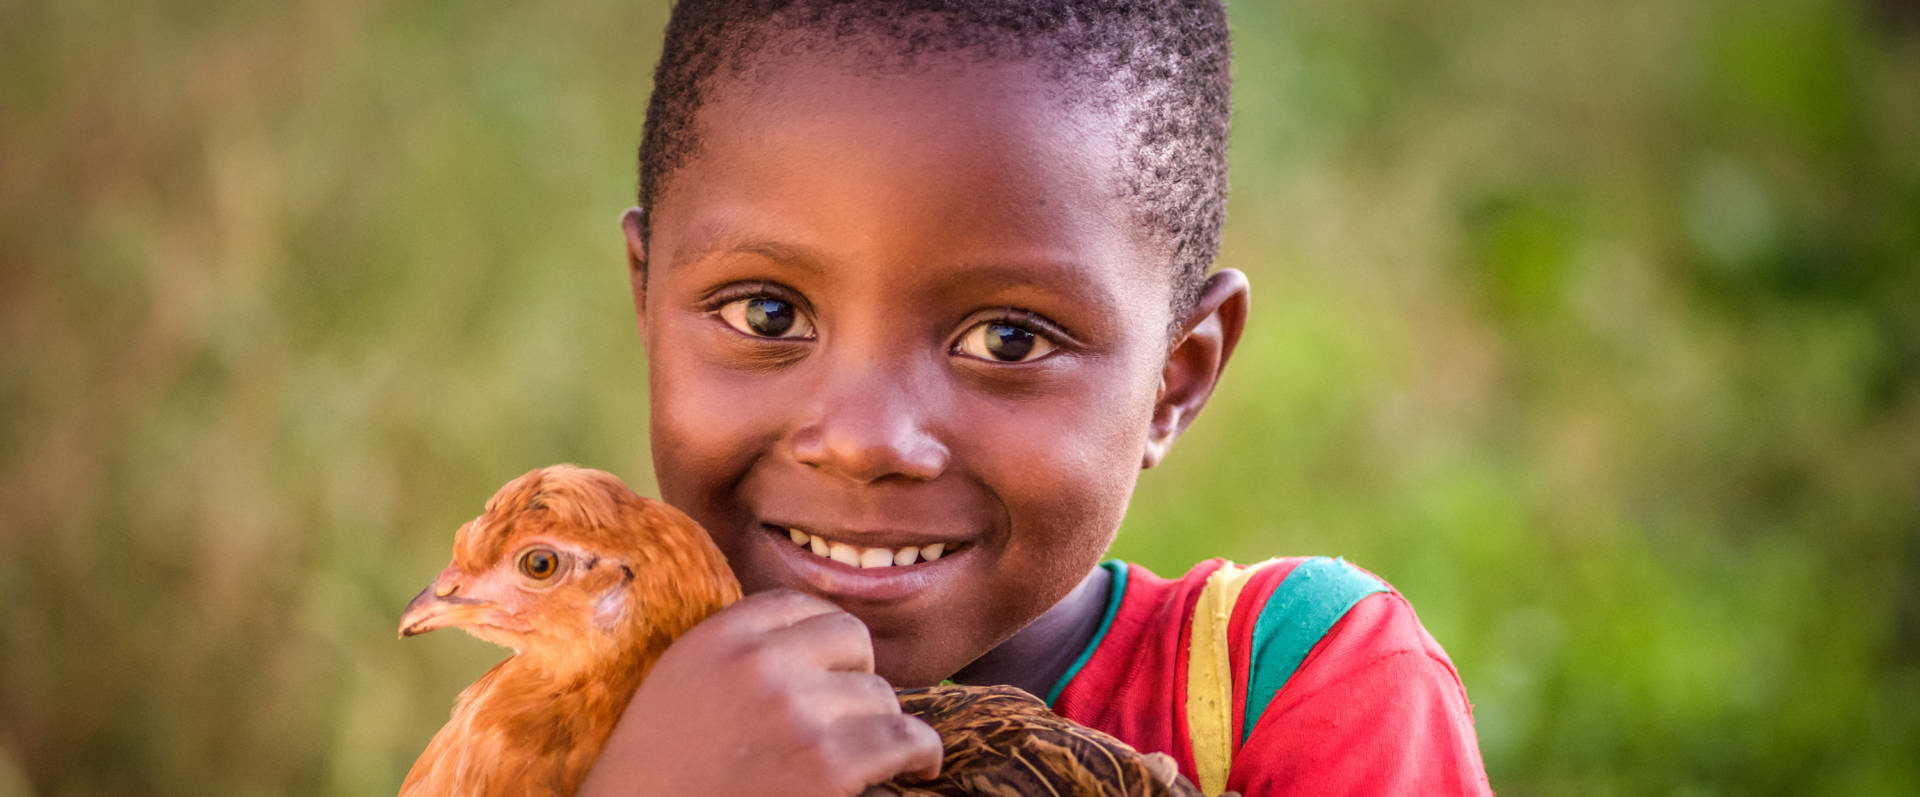 Chickens and goats from World Vision's Gift Catalog and child sponsorship set a family in Zambia on a path to prosperity.